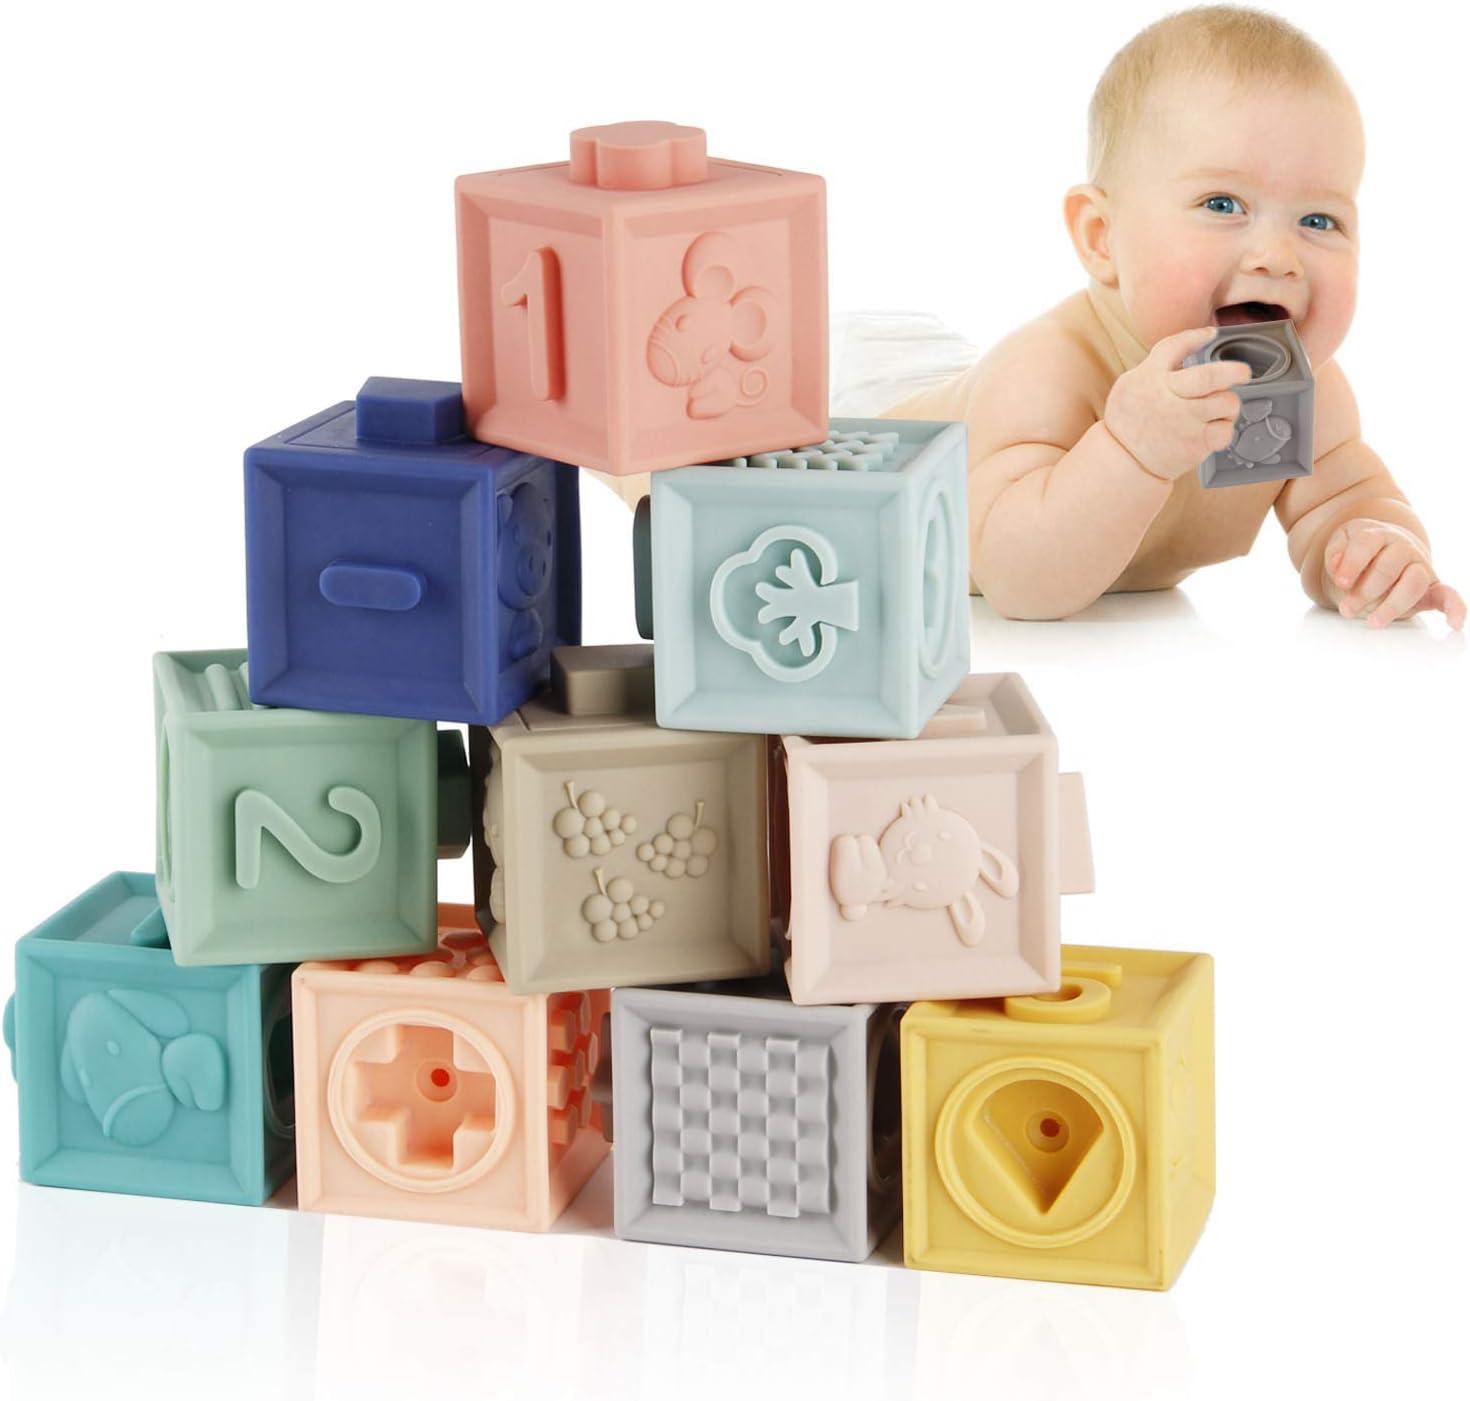 Mini Tudou Baby Blocks Soft Building Blocks Baby Toys Teethers Toy Educational Squeeze Play with Numbers Animals Shapes Textures 6 Months and Up 12PCS